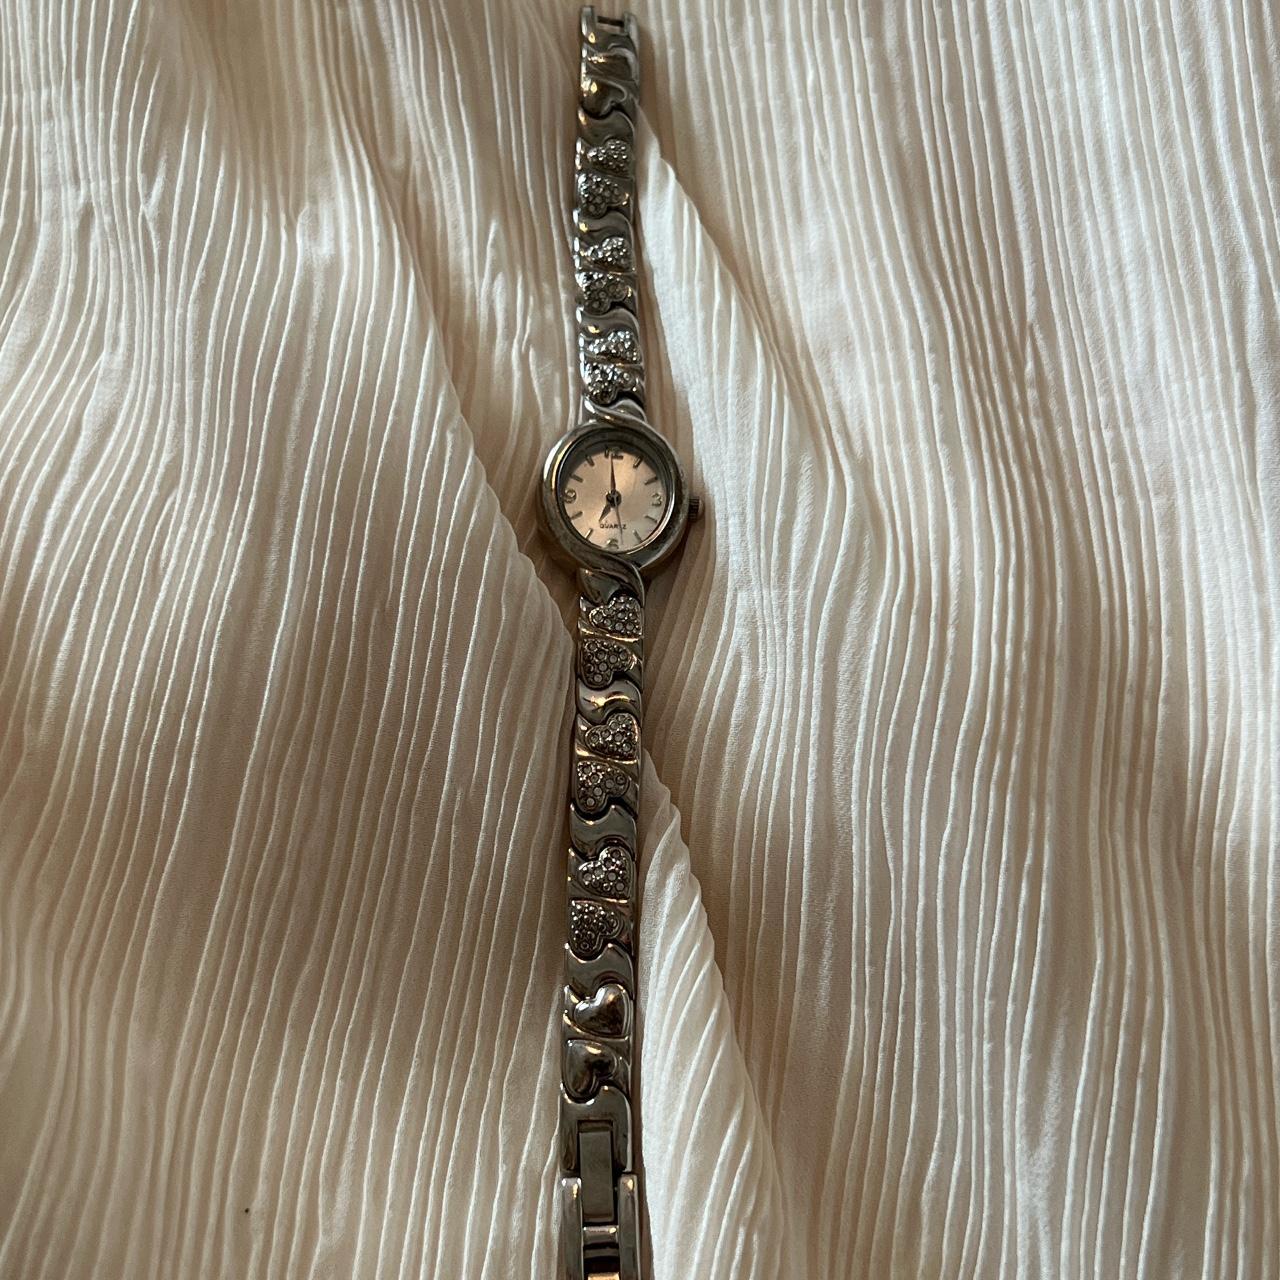 Vintage Silver Tone With Heart Details Watch - Not... - Depop